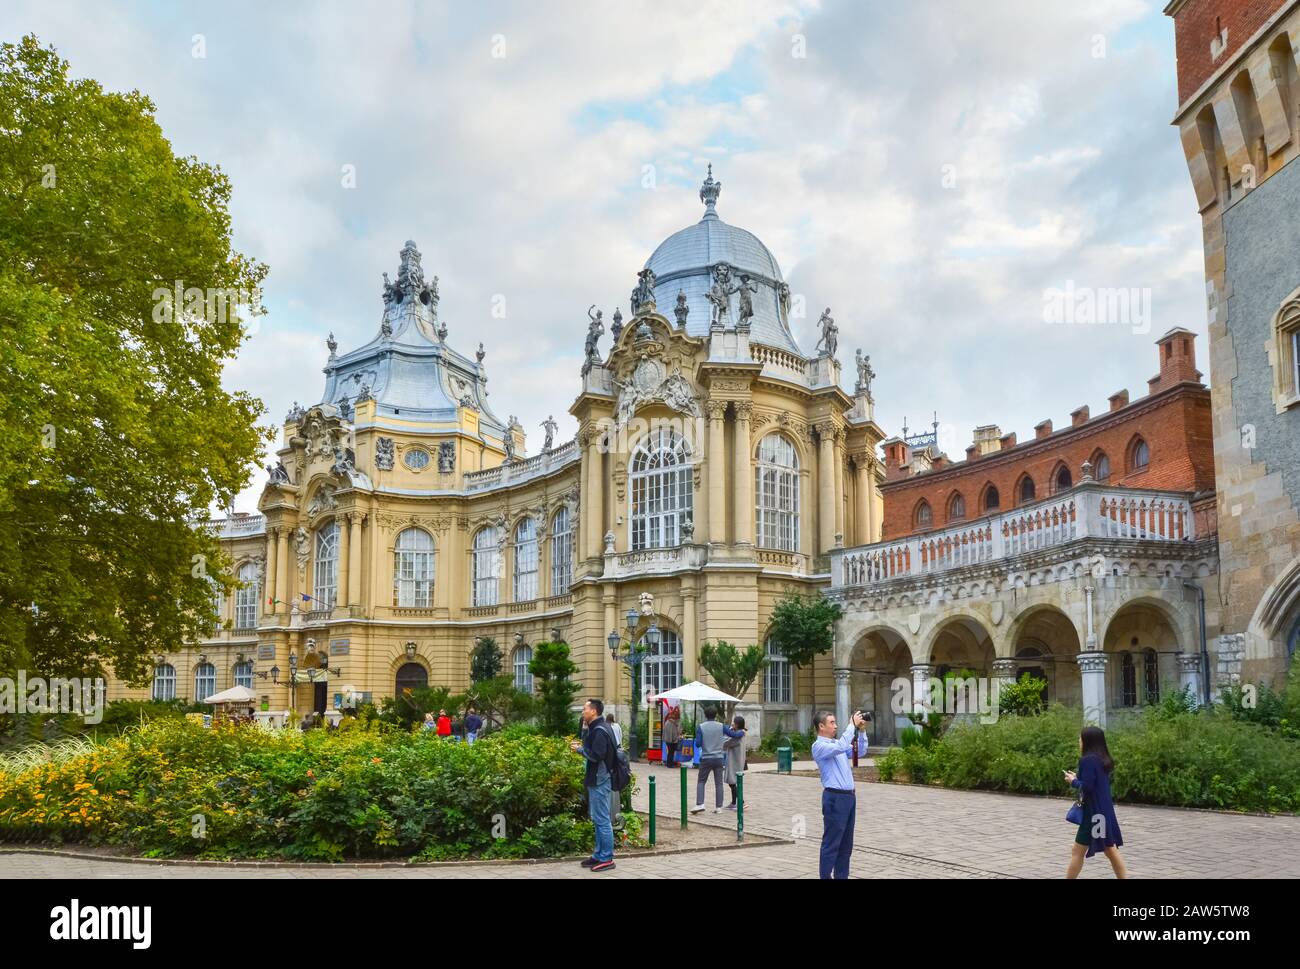 Tourists visit the interior of Vajdahunyad Castle in the City Park of Budapest, Hungary, built in 1896 as part of the Millennial Exhibition. Stock Photo